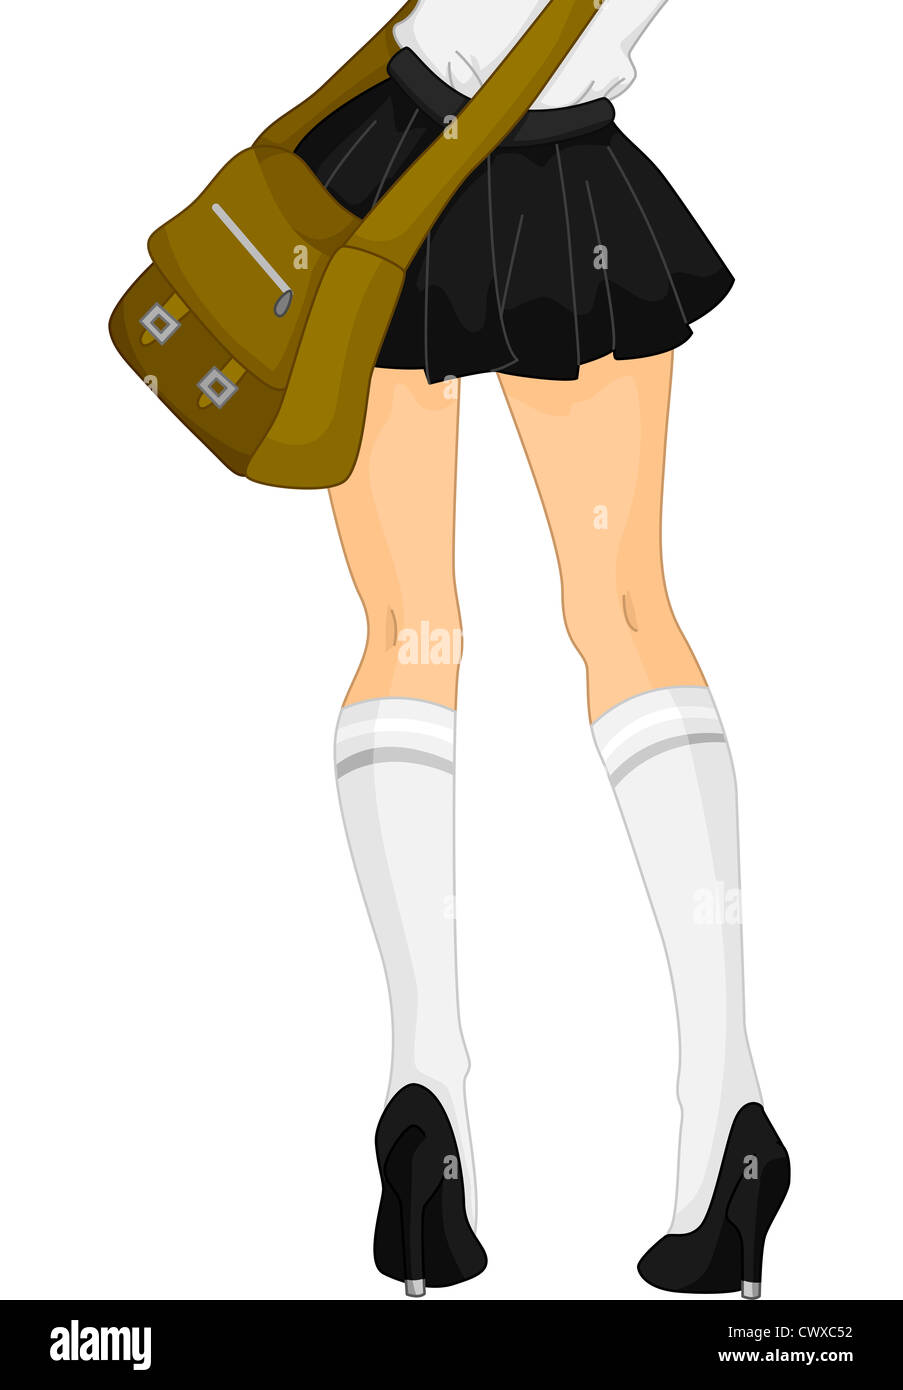 Cropped Illustration Featuring the Legs of a School Girl Wearing a Short Skirt and Knee-high Socks Stock Photo